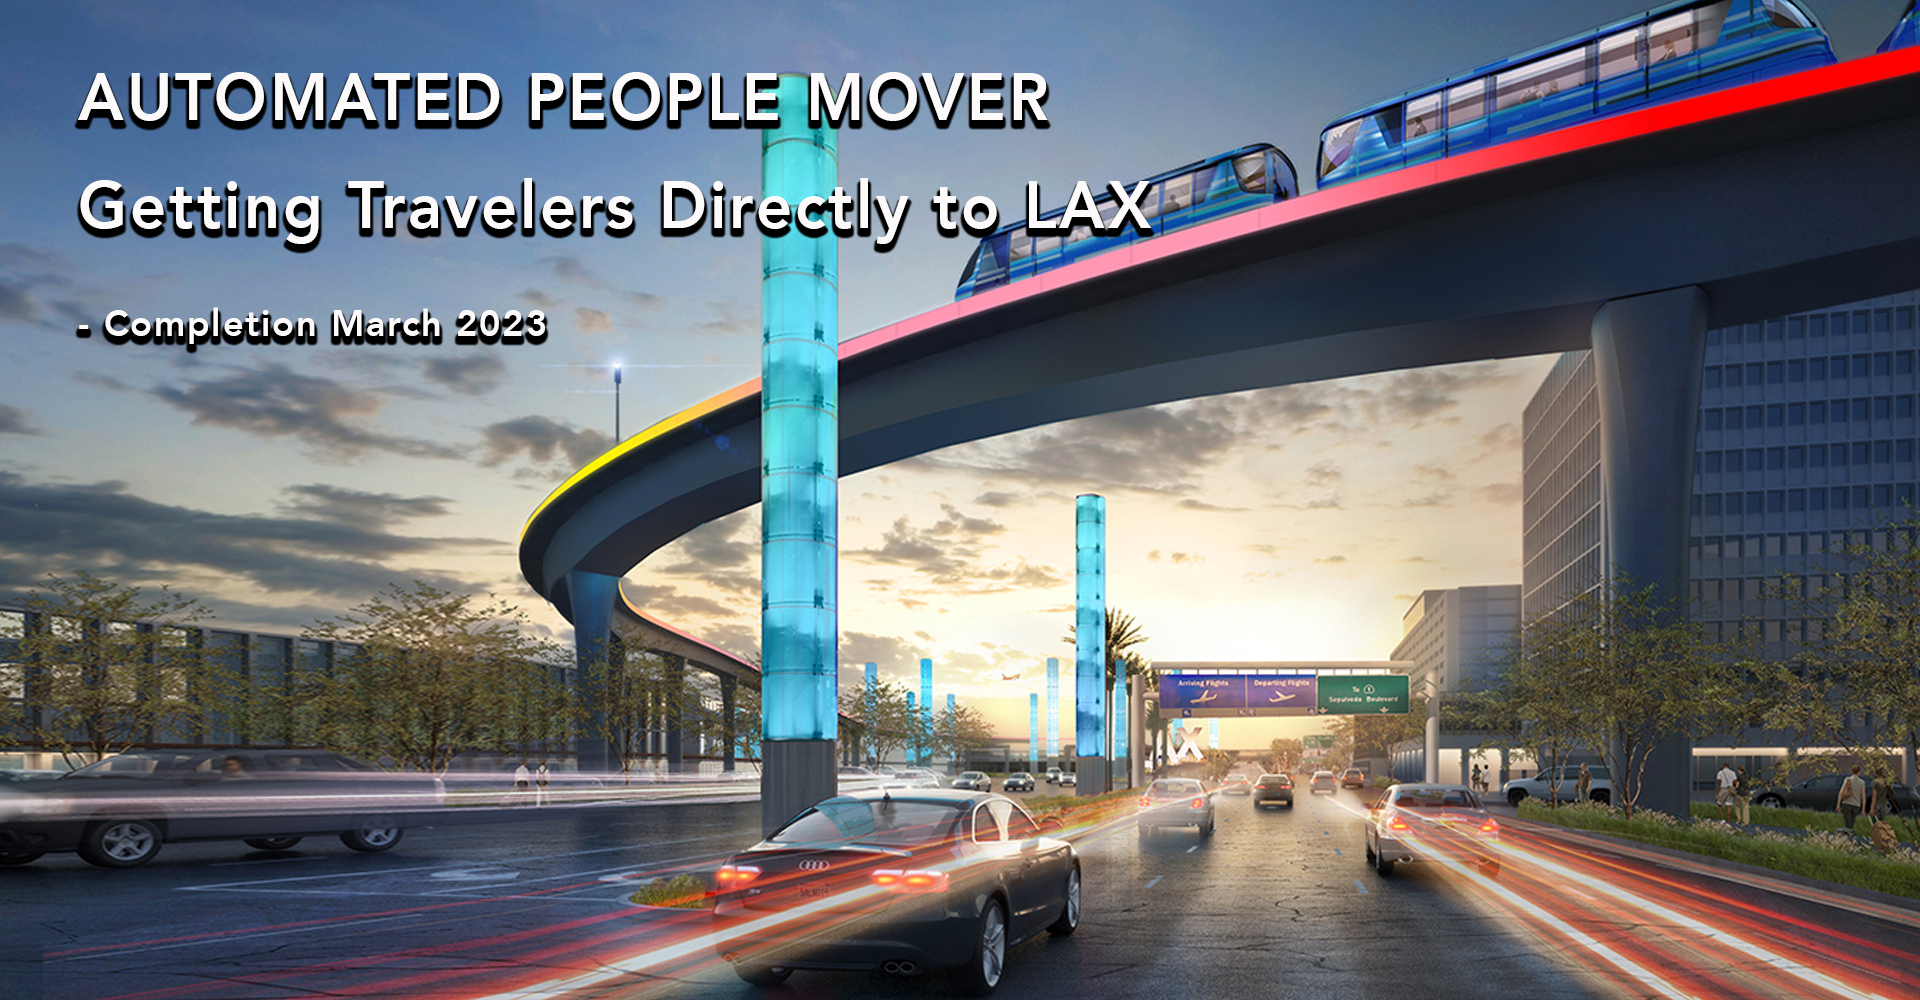 LAX people mover image 3.jpg